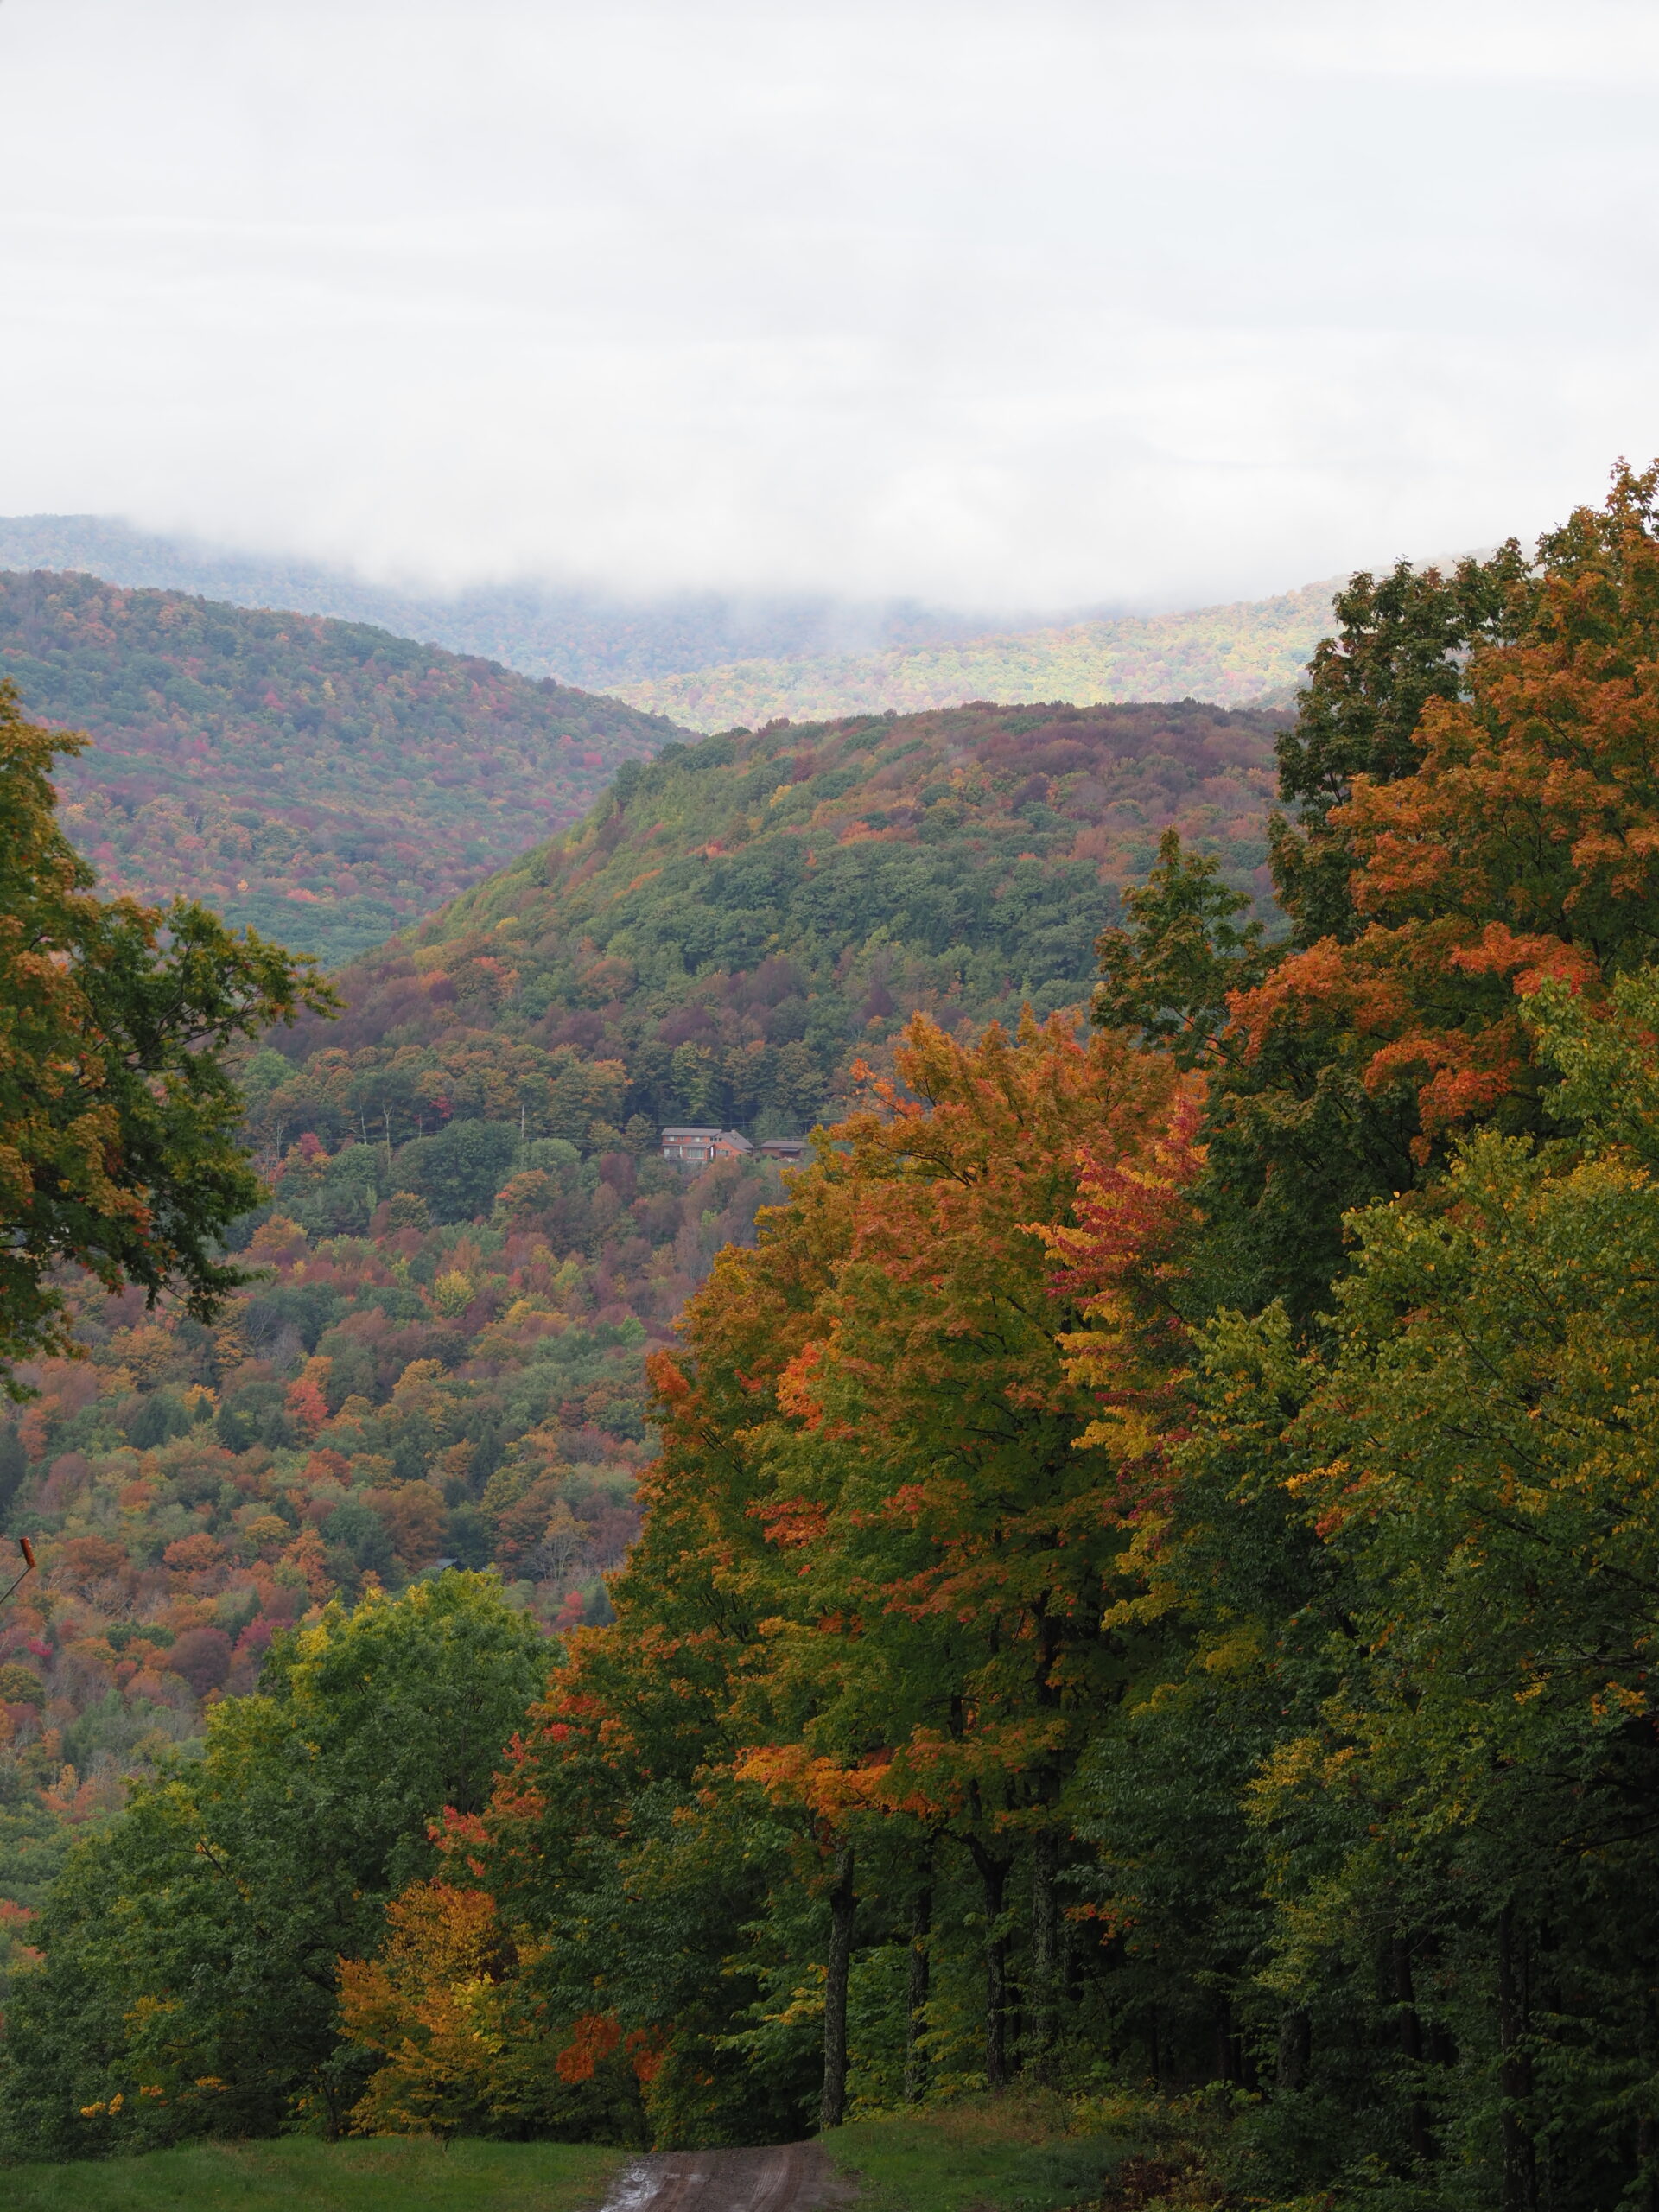 Looking from the top of a ski run in southern Massachusetts, the valley below shows the richness of fall colors that can last for weeks or days depending on the year.  ANDREW MESSINGER